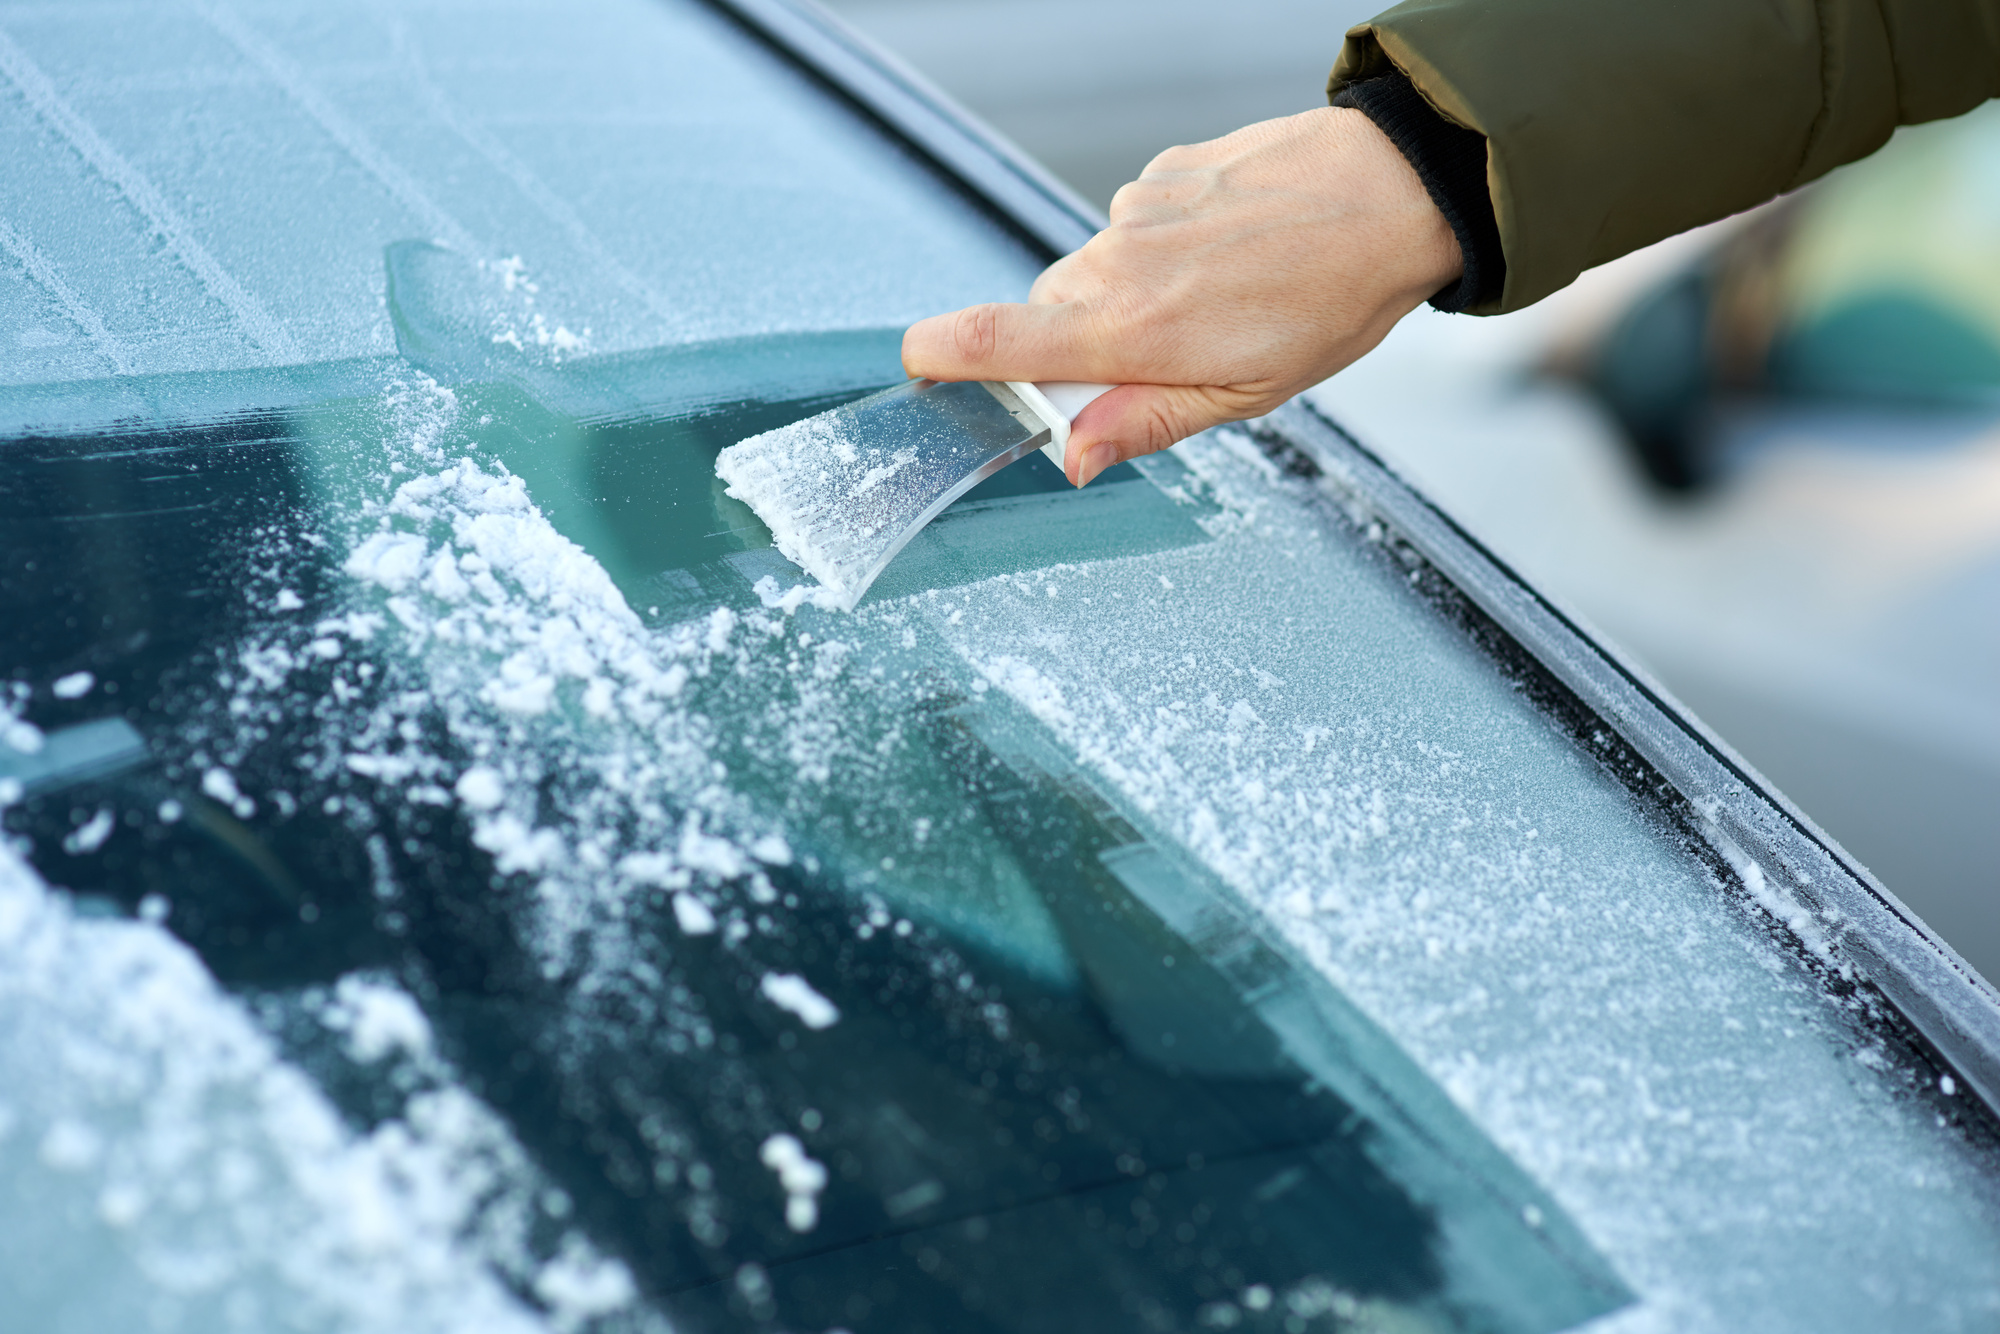 De-Ice Your Windshield & Keep Ice Off of It